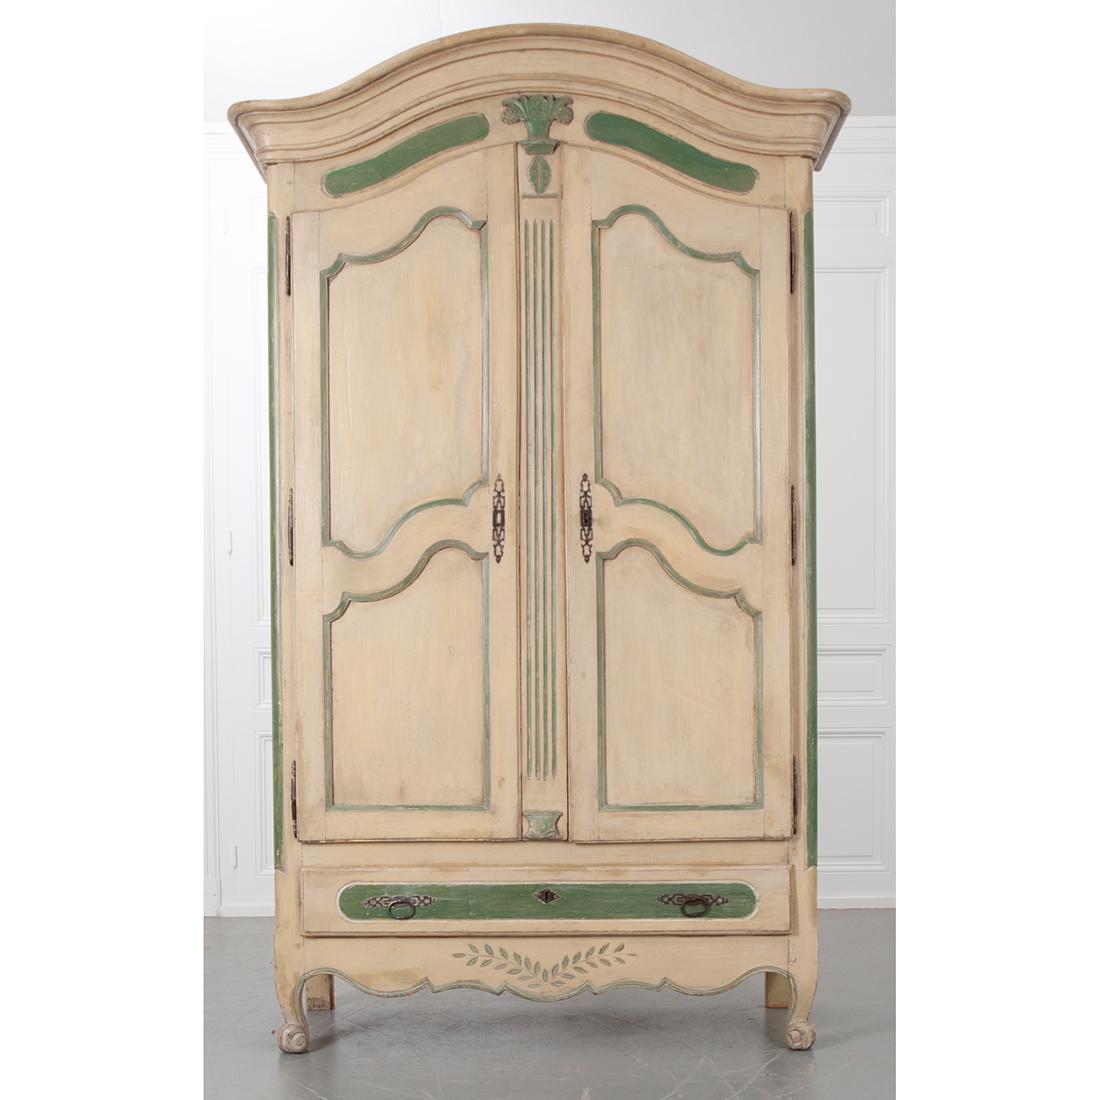 This is an outstanding, painted French Provincial armoire with Chapeau de Gendarme cornice. Soft creamy-beige body color with green highlighting the details and adding character to this piece. There are two doors with shapely carved panels creating